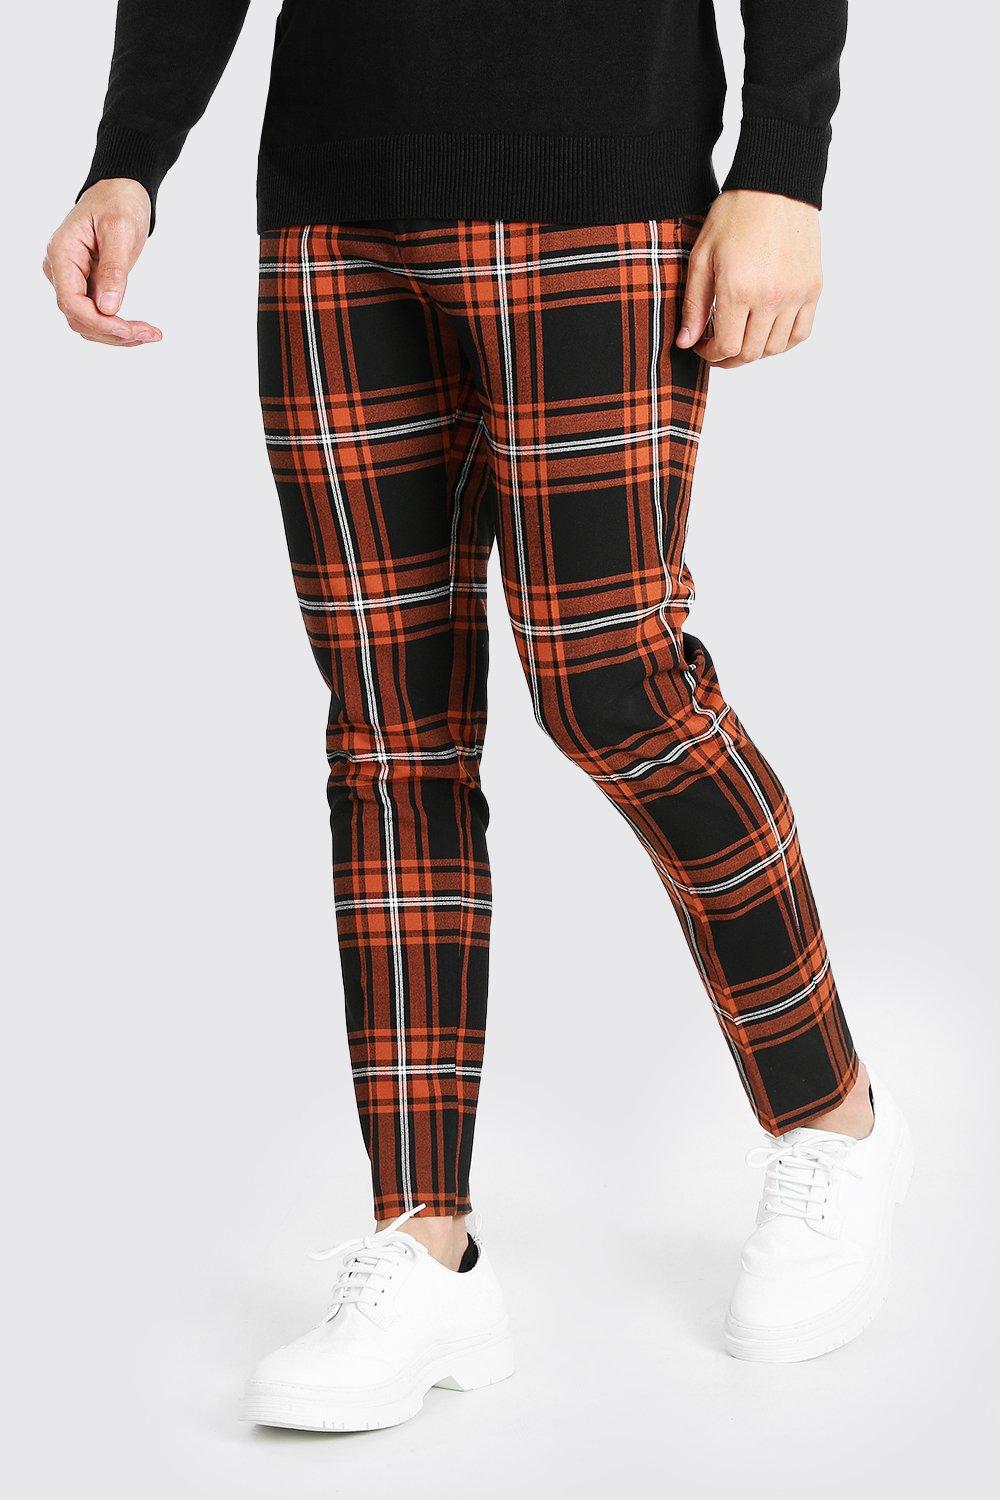 mens red and green plaid pants